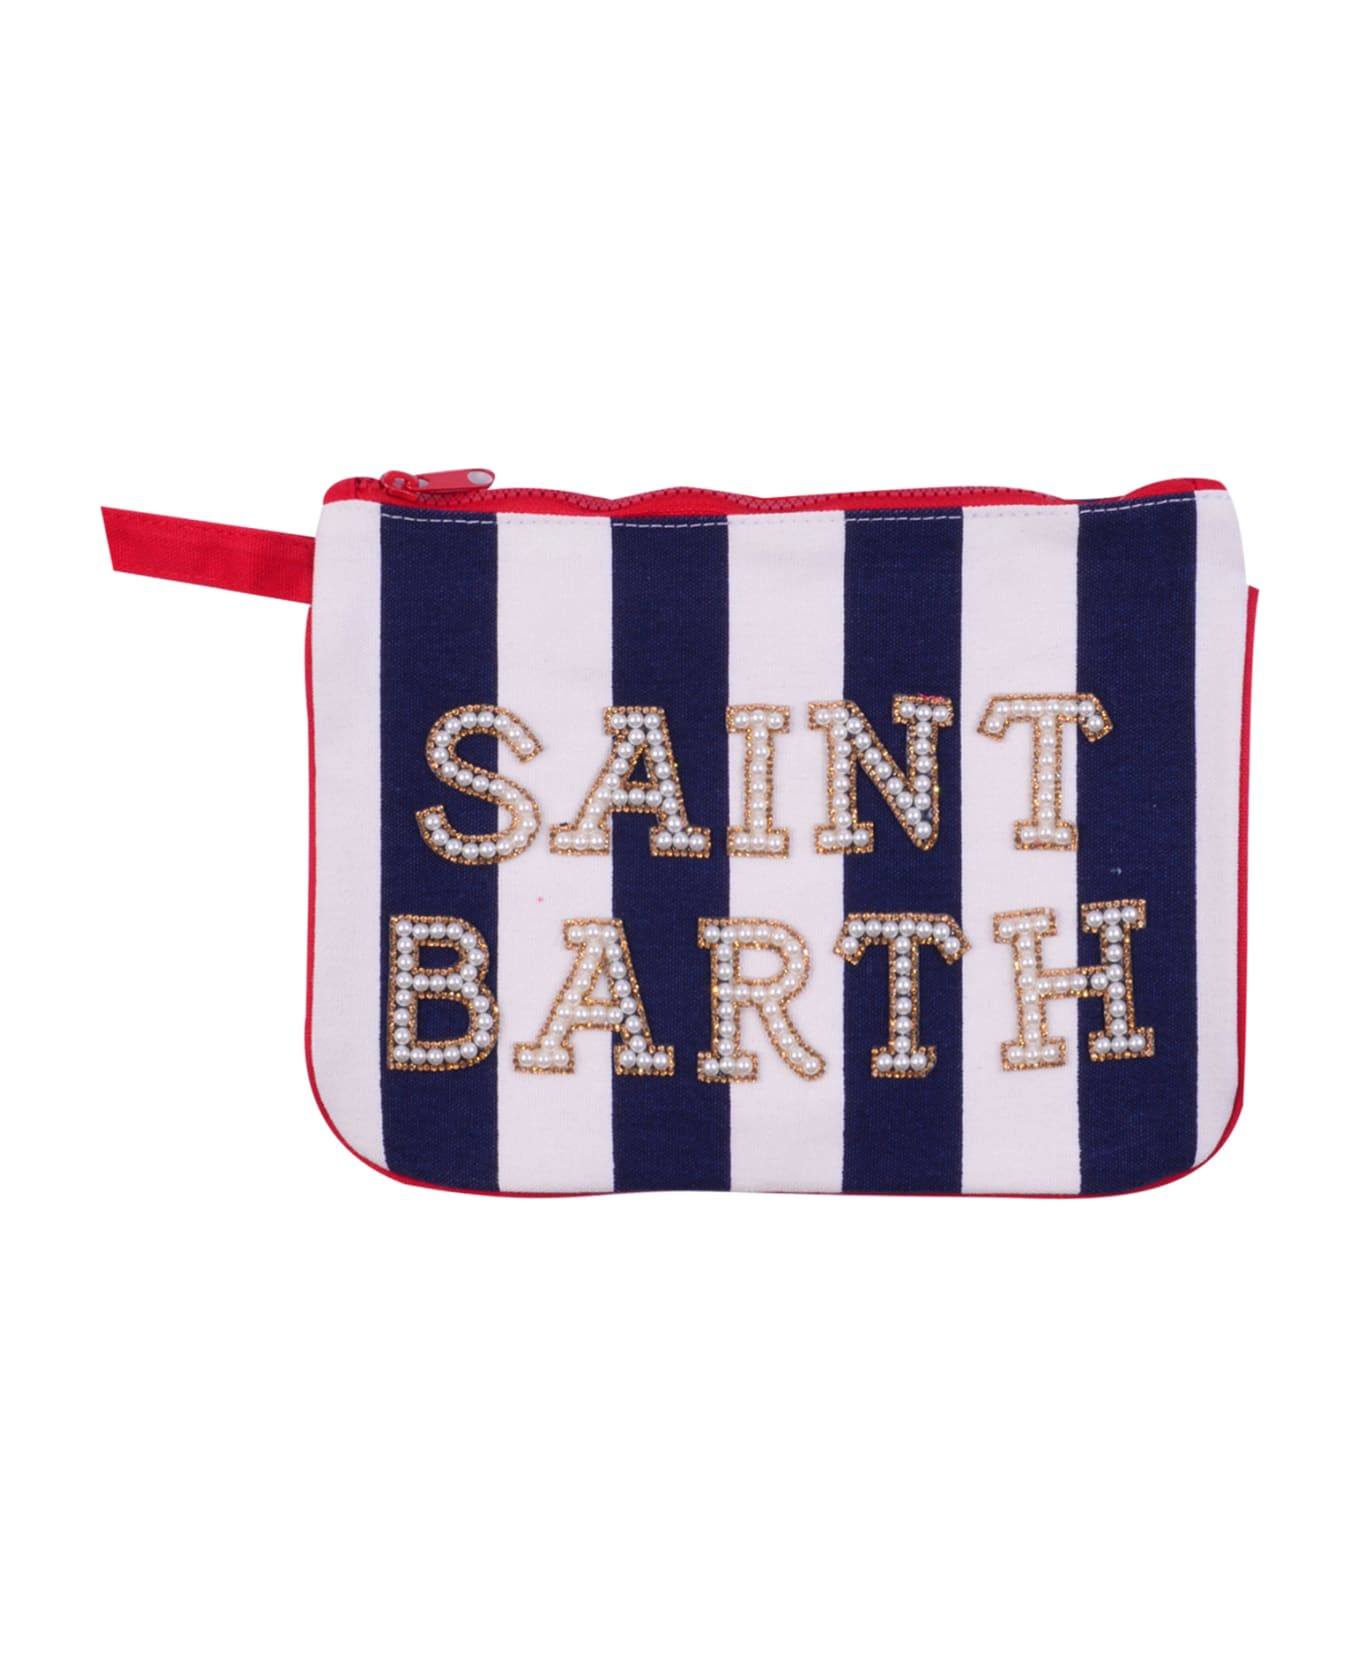 MC2 Saint Barth Canvas Clutch With Stripes - Multicolor アクセサリー＆ギフト